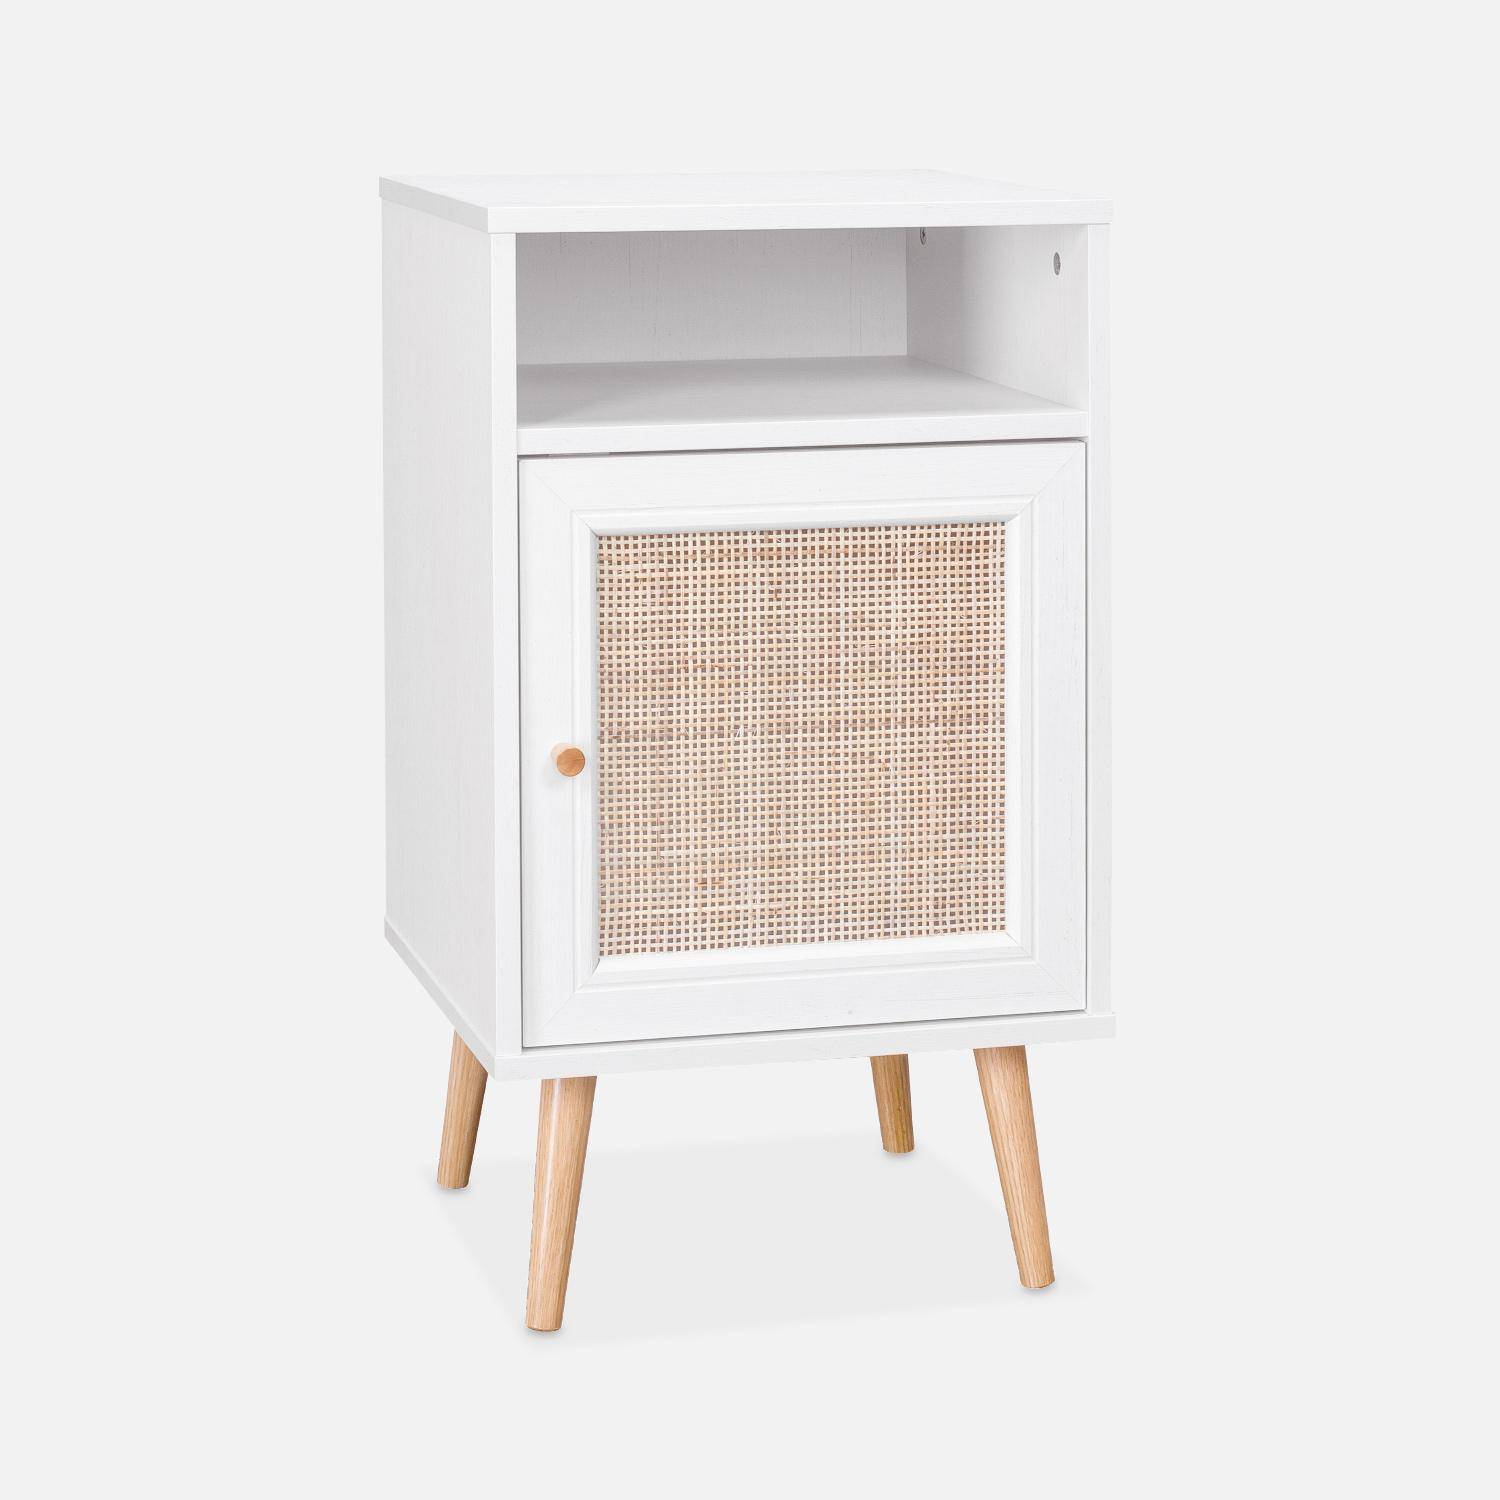 Pair of Scandi-style wood and cane rattan bedside tables with cupboard, 40x39x70cm - Boheme - White Photo6